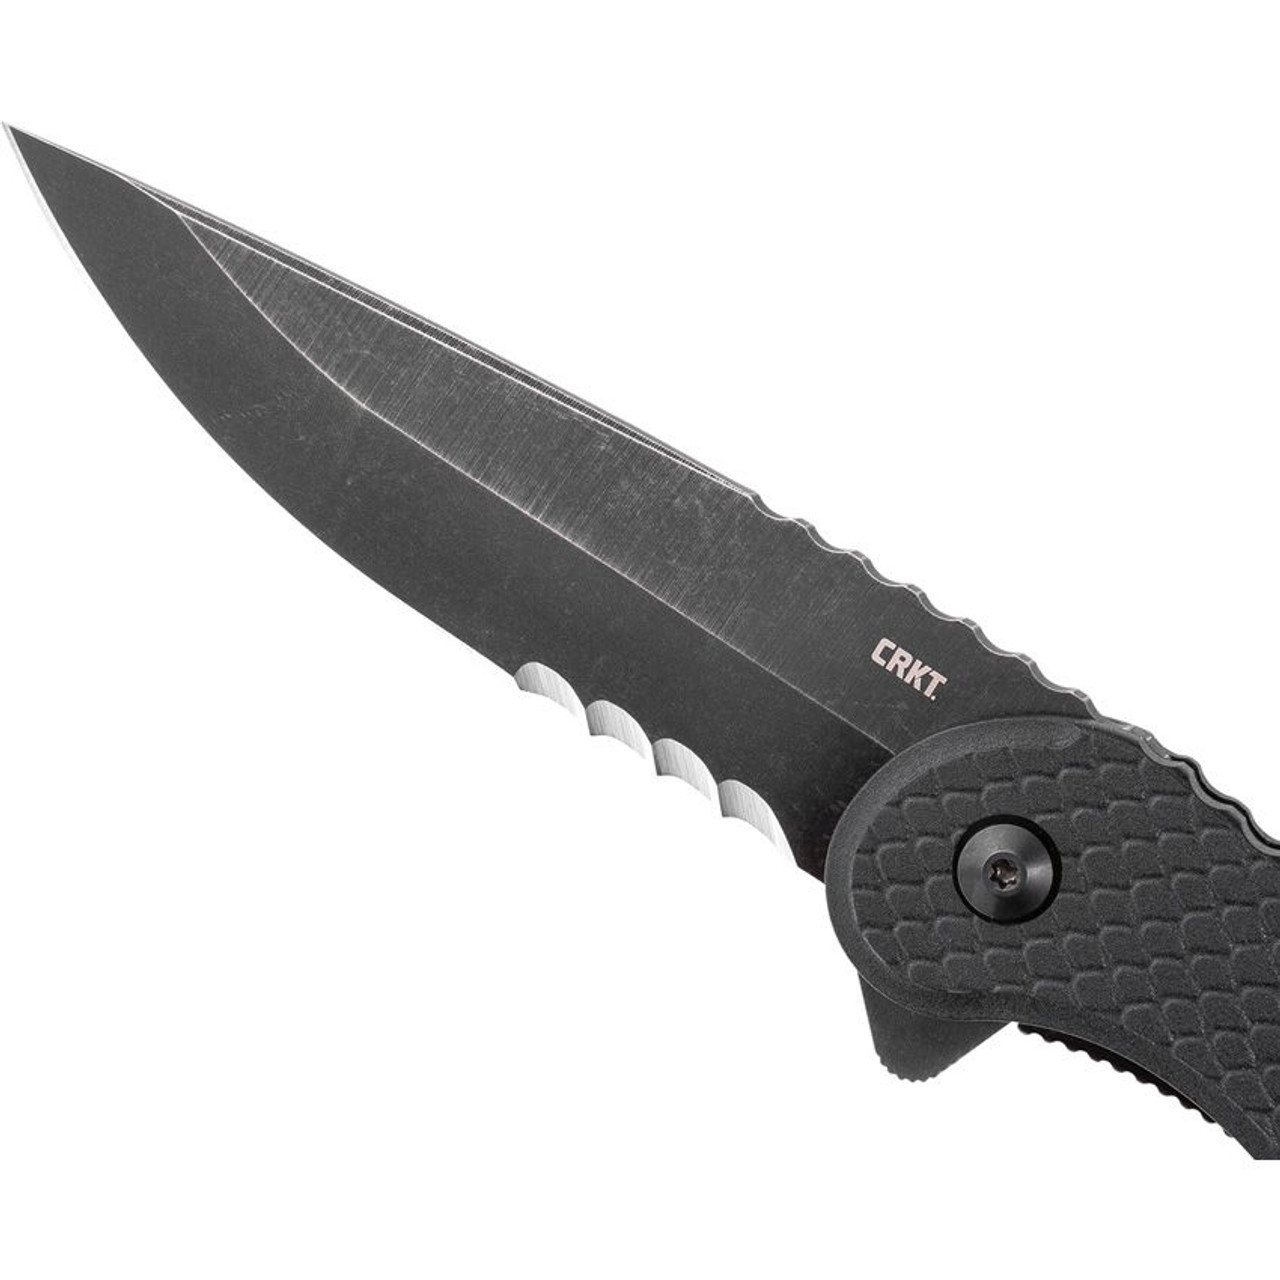 CRKT Taco Viper A/O (CR2267) 4.22" 1.4116 Blackwashed Veff Serrations Drop Point Partially Serrated Blade, Black Glass Reinforced Nylon Handle